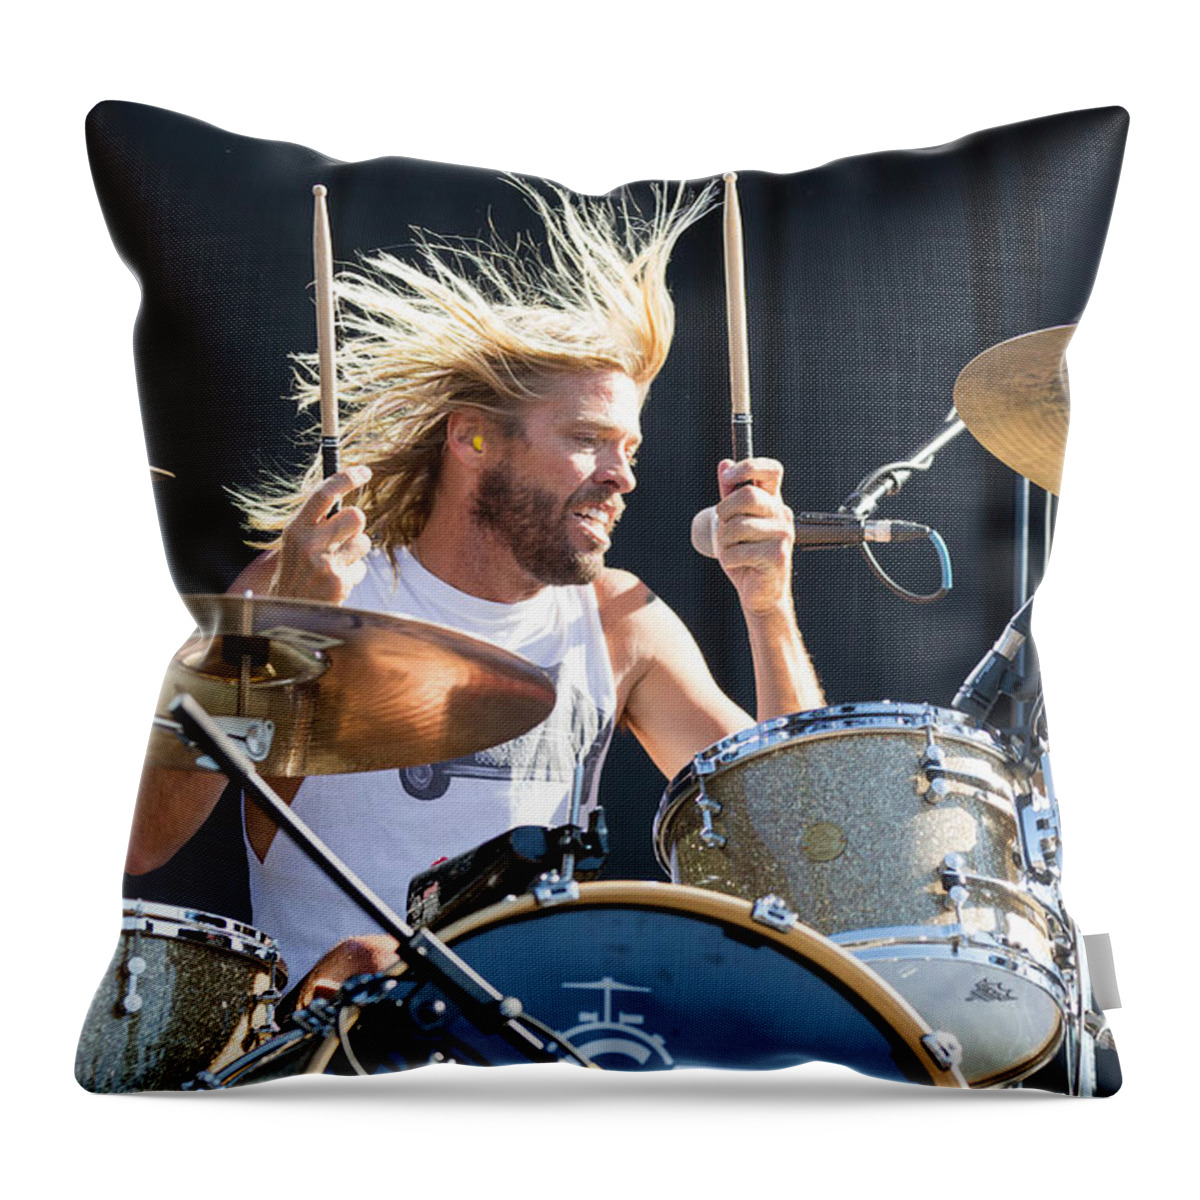 Foo Throw Pillow featuring the photograph Foo Fighters Taylor Hawkins by Action